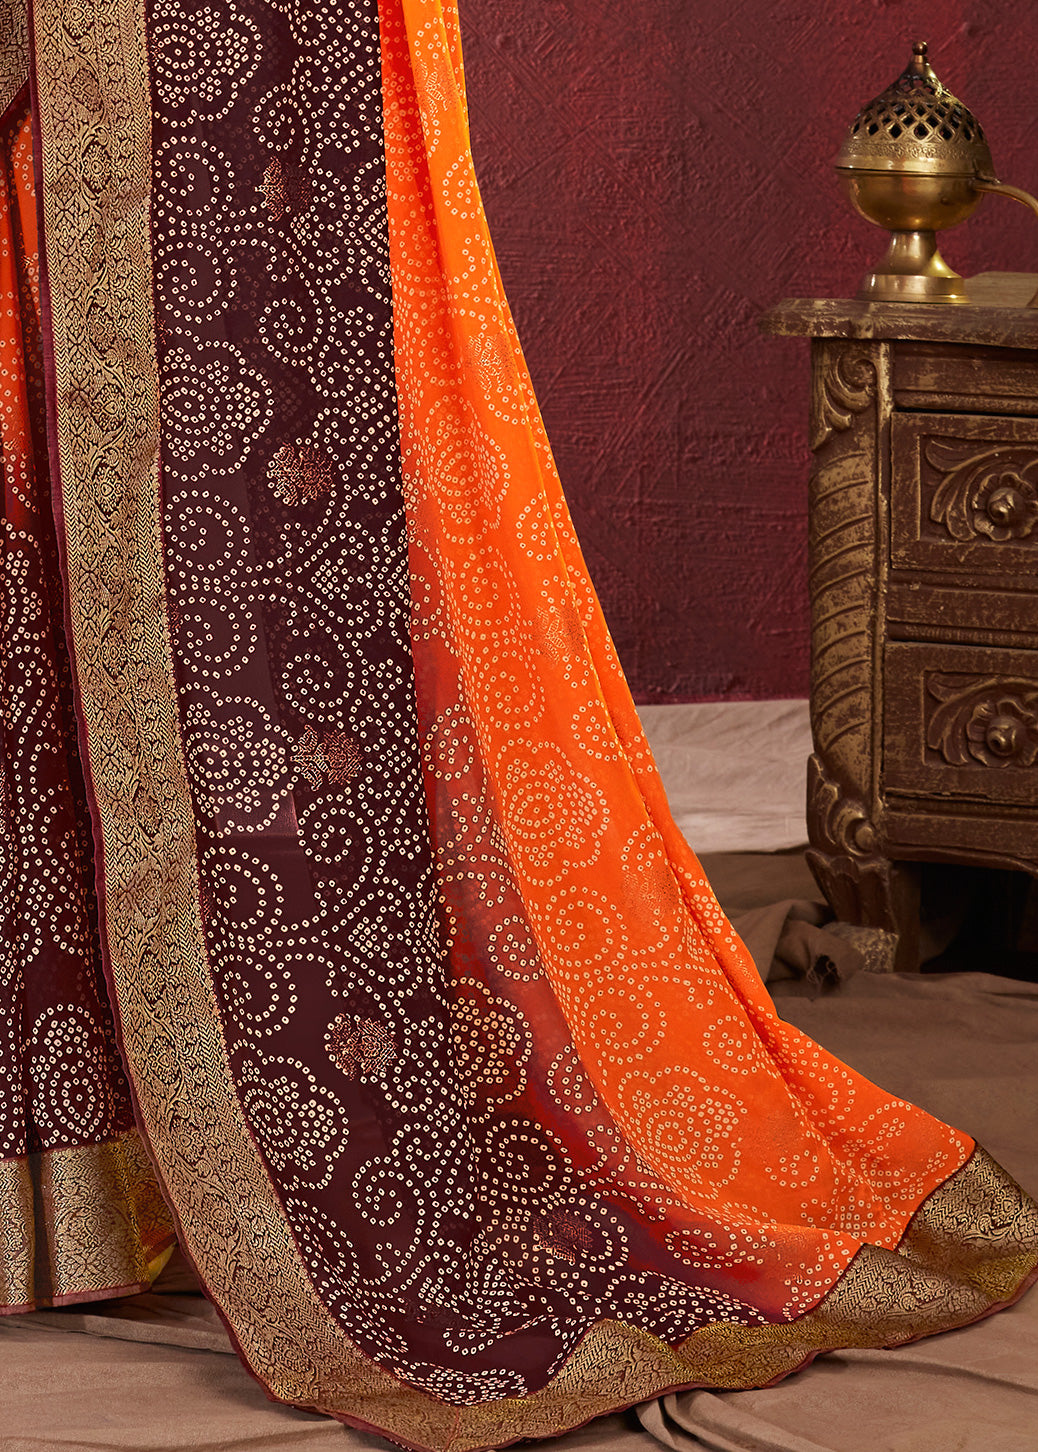 Dual Shades Bandhani Printed Maroon Orange Weightless Georgette Saree With Embroidery Lace